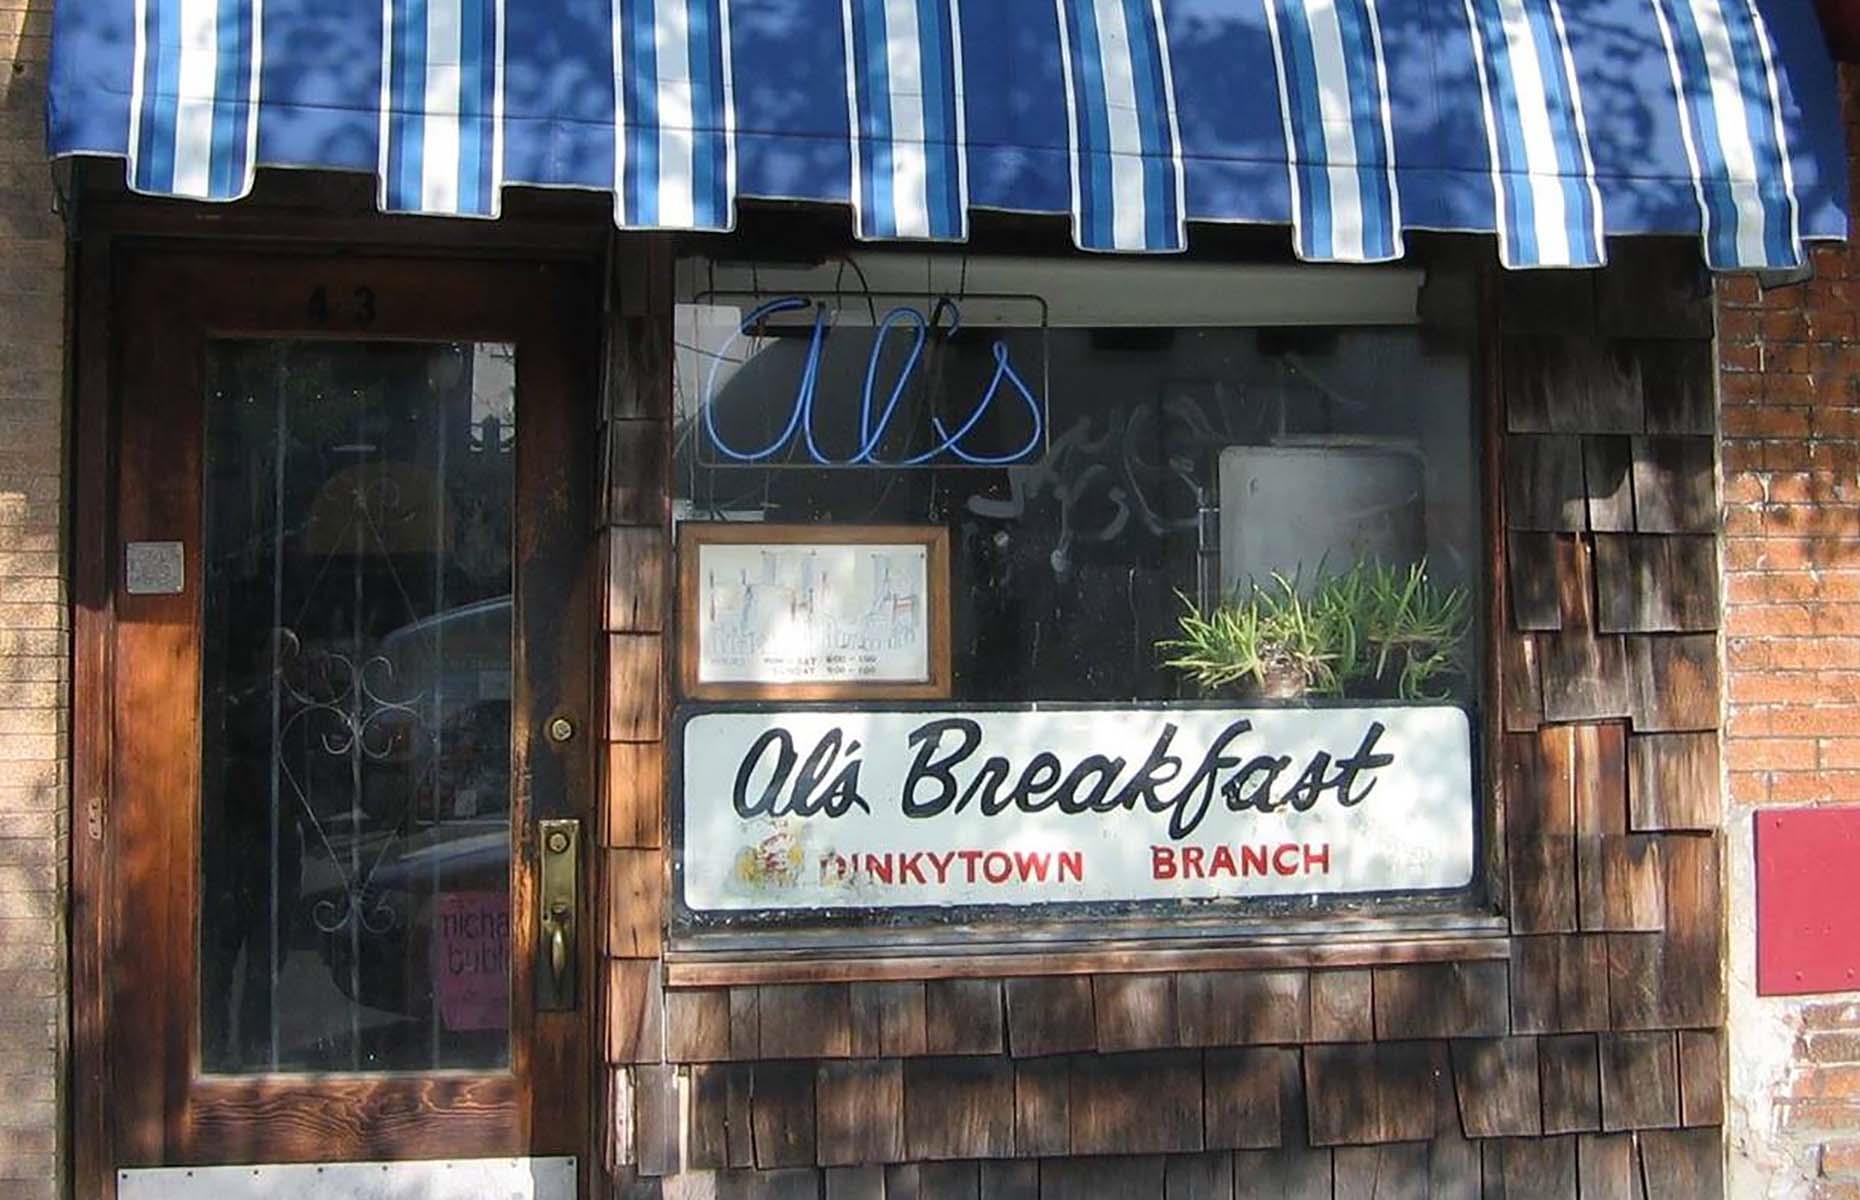 <p>Though this Minneapolis diner just off I-94 is tiny, the breakfasts are huge. While it's too small to safely dine indoors, <a href="https://www.yelp.com/biz/als-breakfast-minneapolis?sort_by=date_desc">its favorite</a> poached eggs on corned beef hash, walnut blueberry pancakes, bacon and hash browns can be ordered for <a href="https://www.facebook.com/Als-Breakfast-92308895353/">curbside pick-up</a>. That's what guests are currently doing and the food is said to travel well.</p>